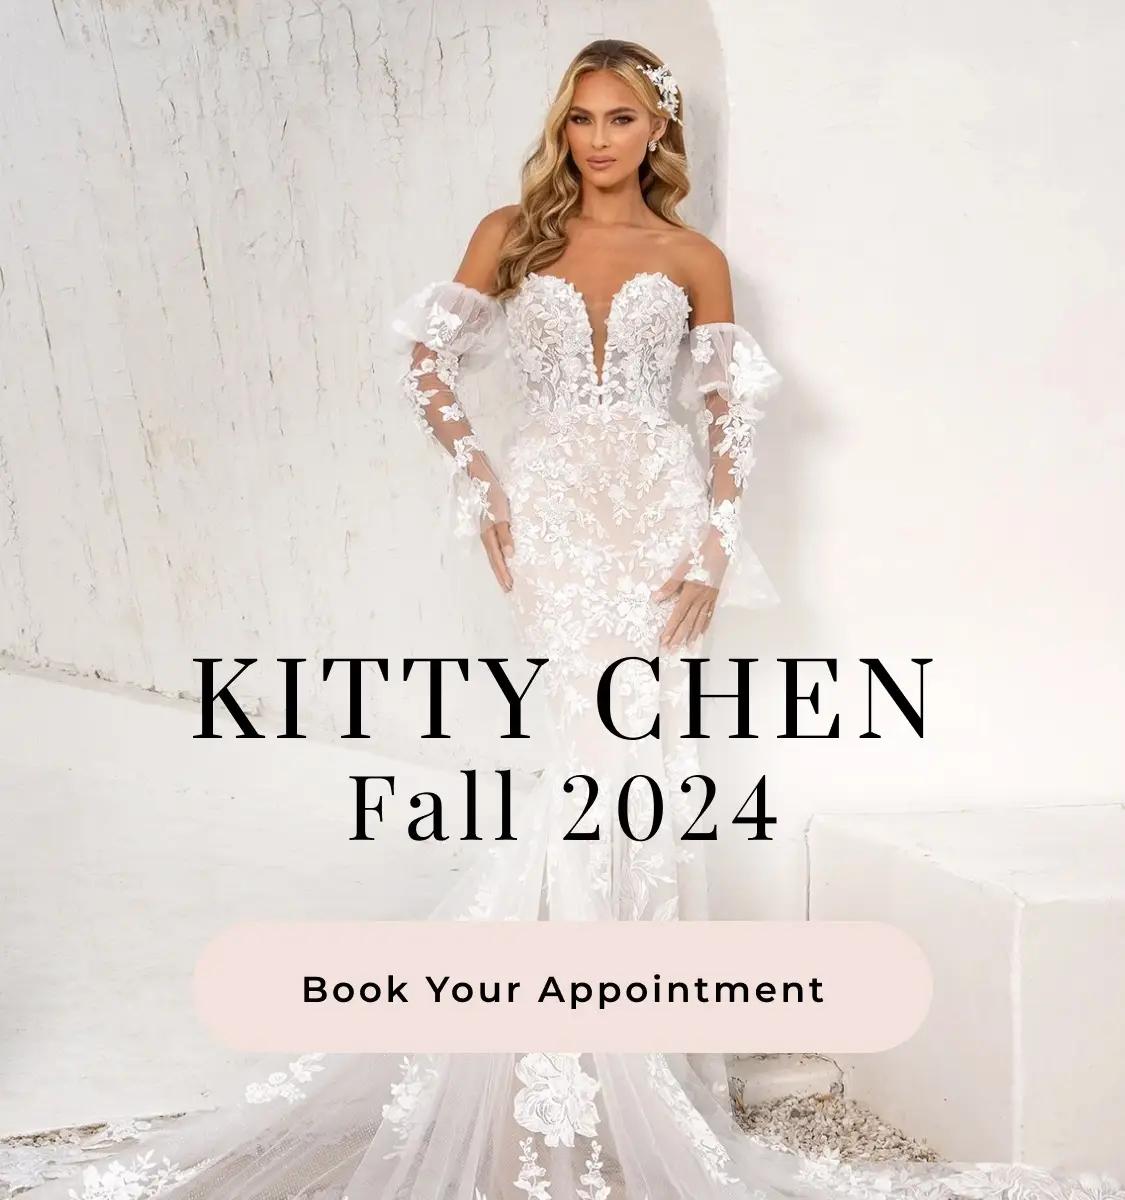 Kitty Chen Fall 2024 Banner Mobile